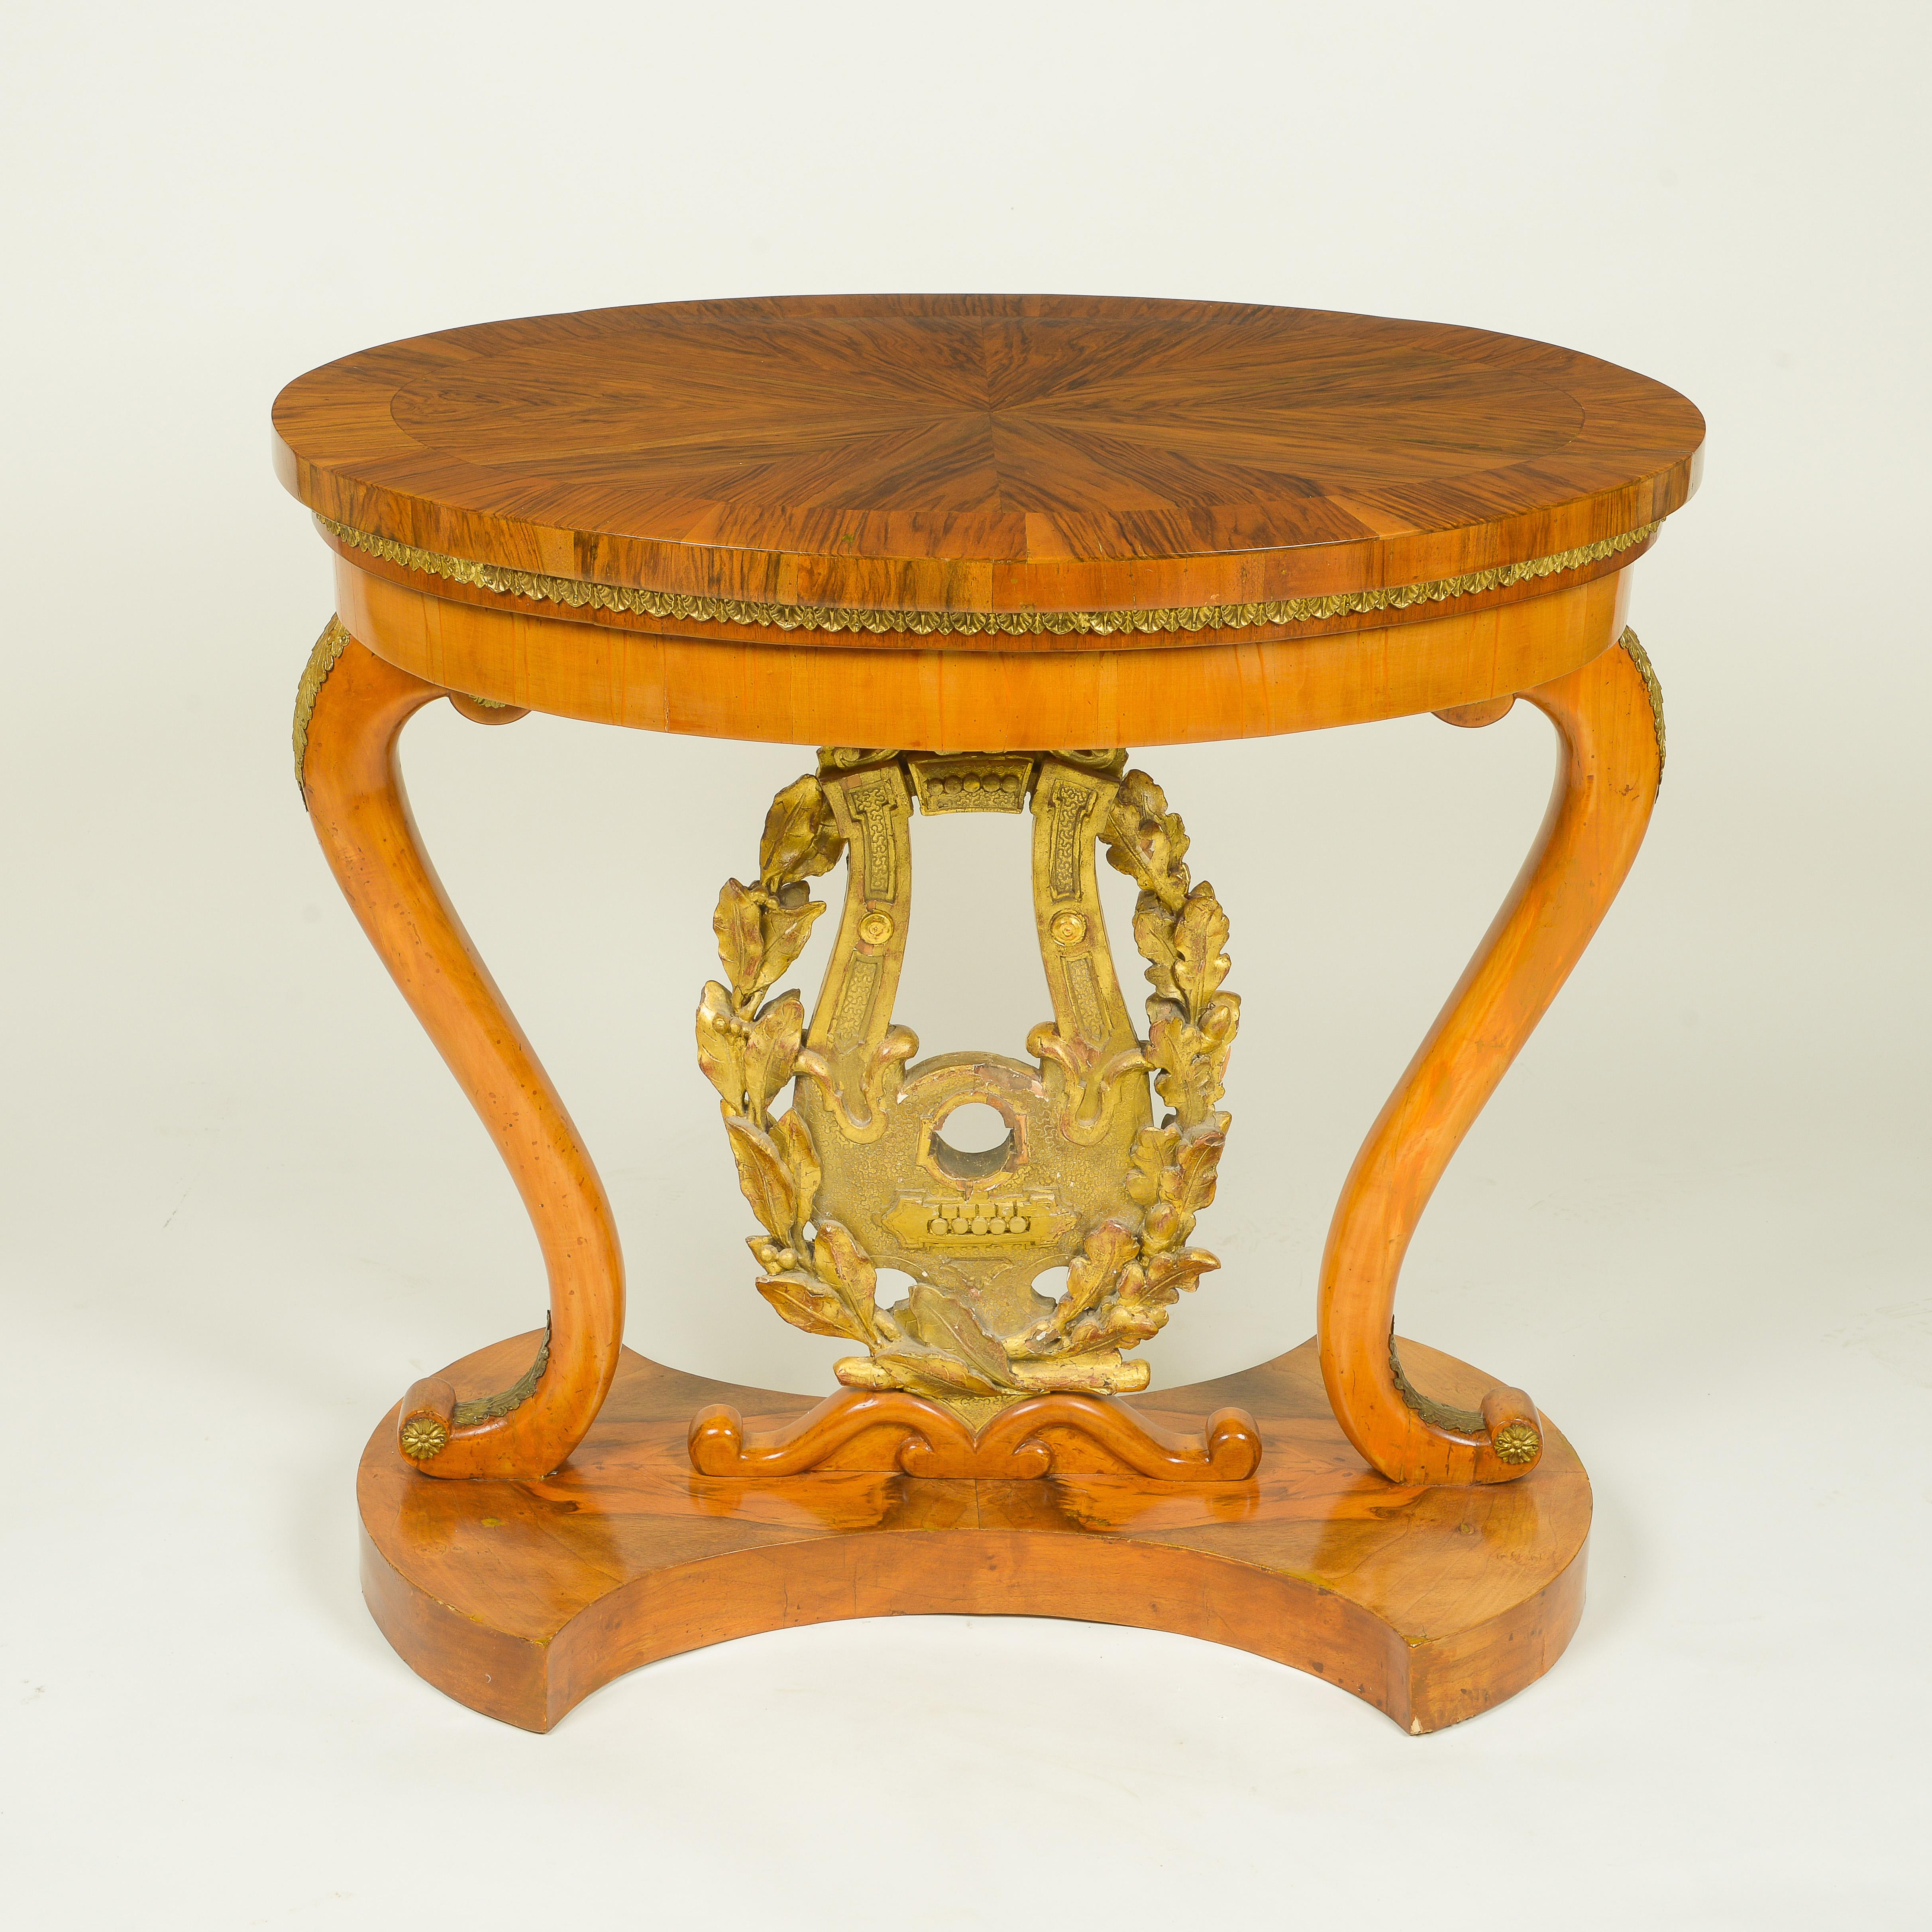 Mid-19th Century Unusual Italian Walnut and Giltwood Center Table For Sale